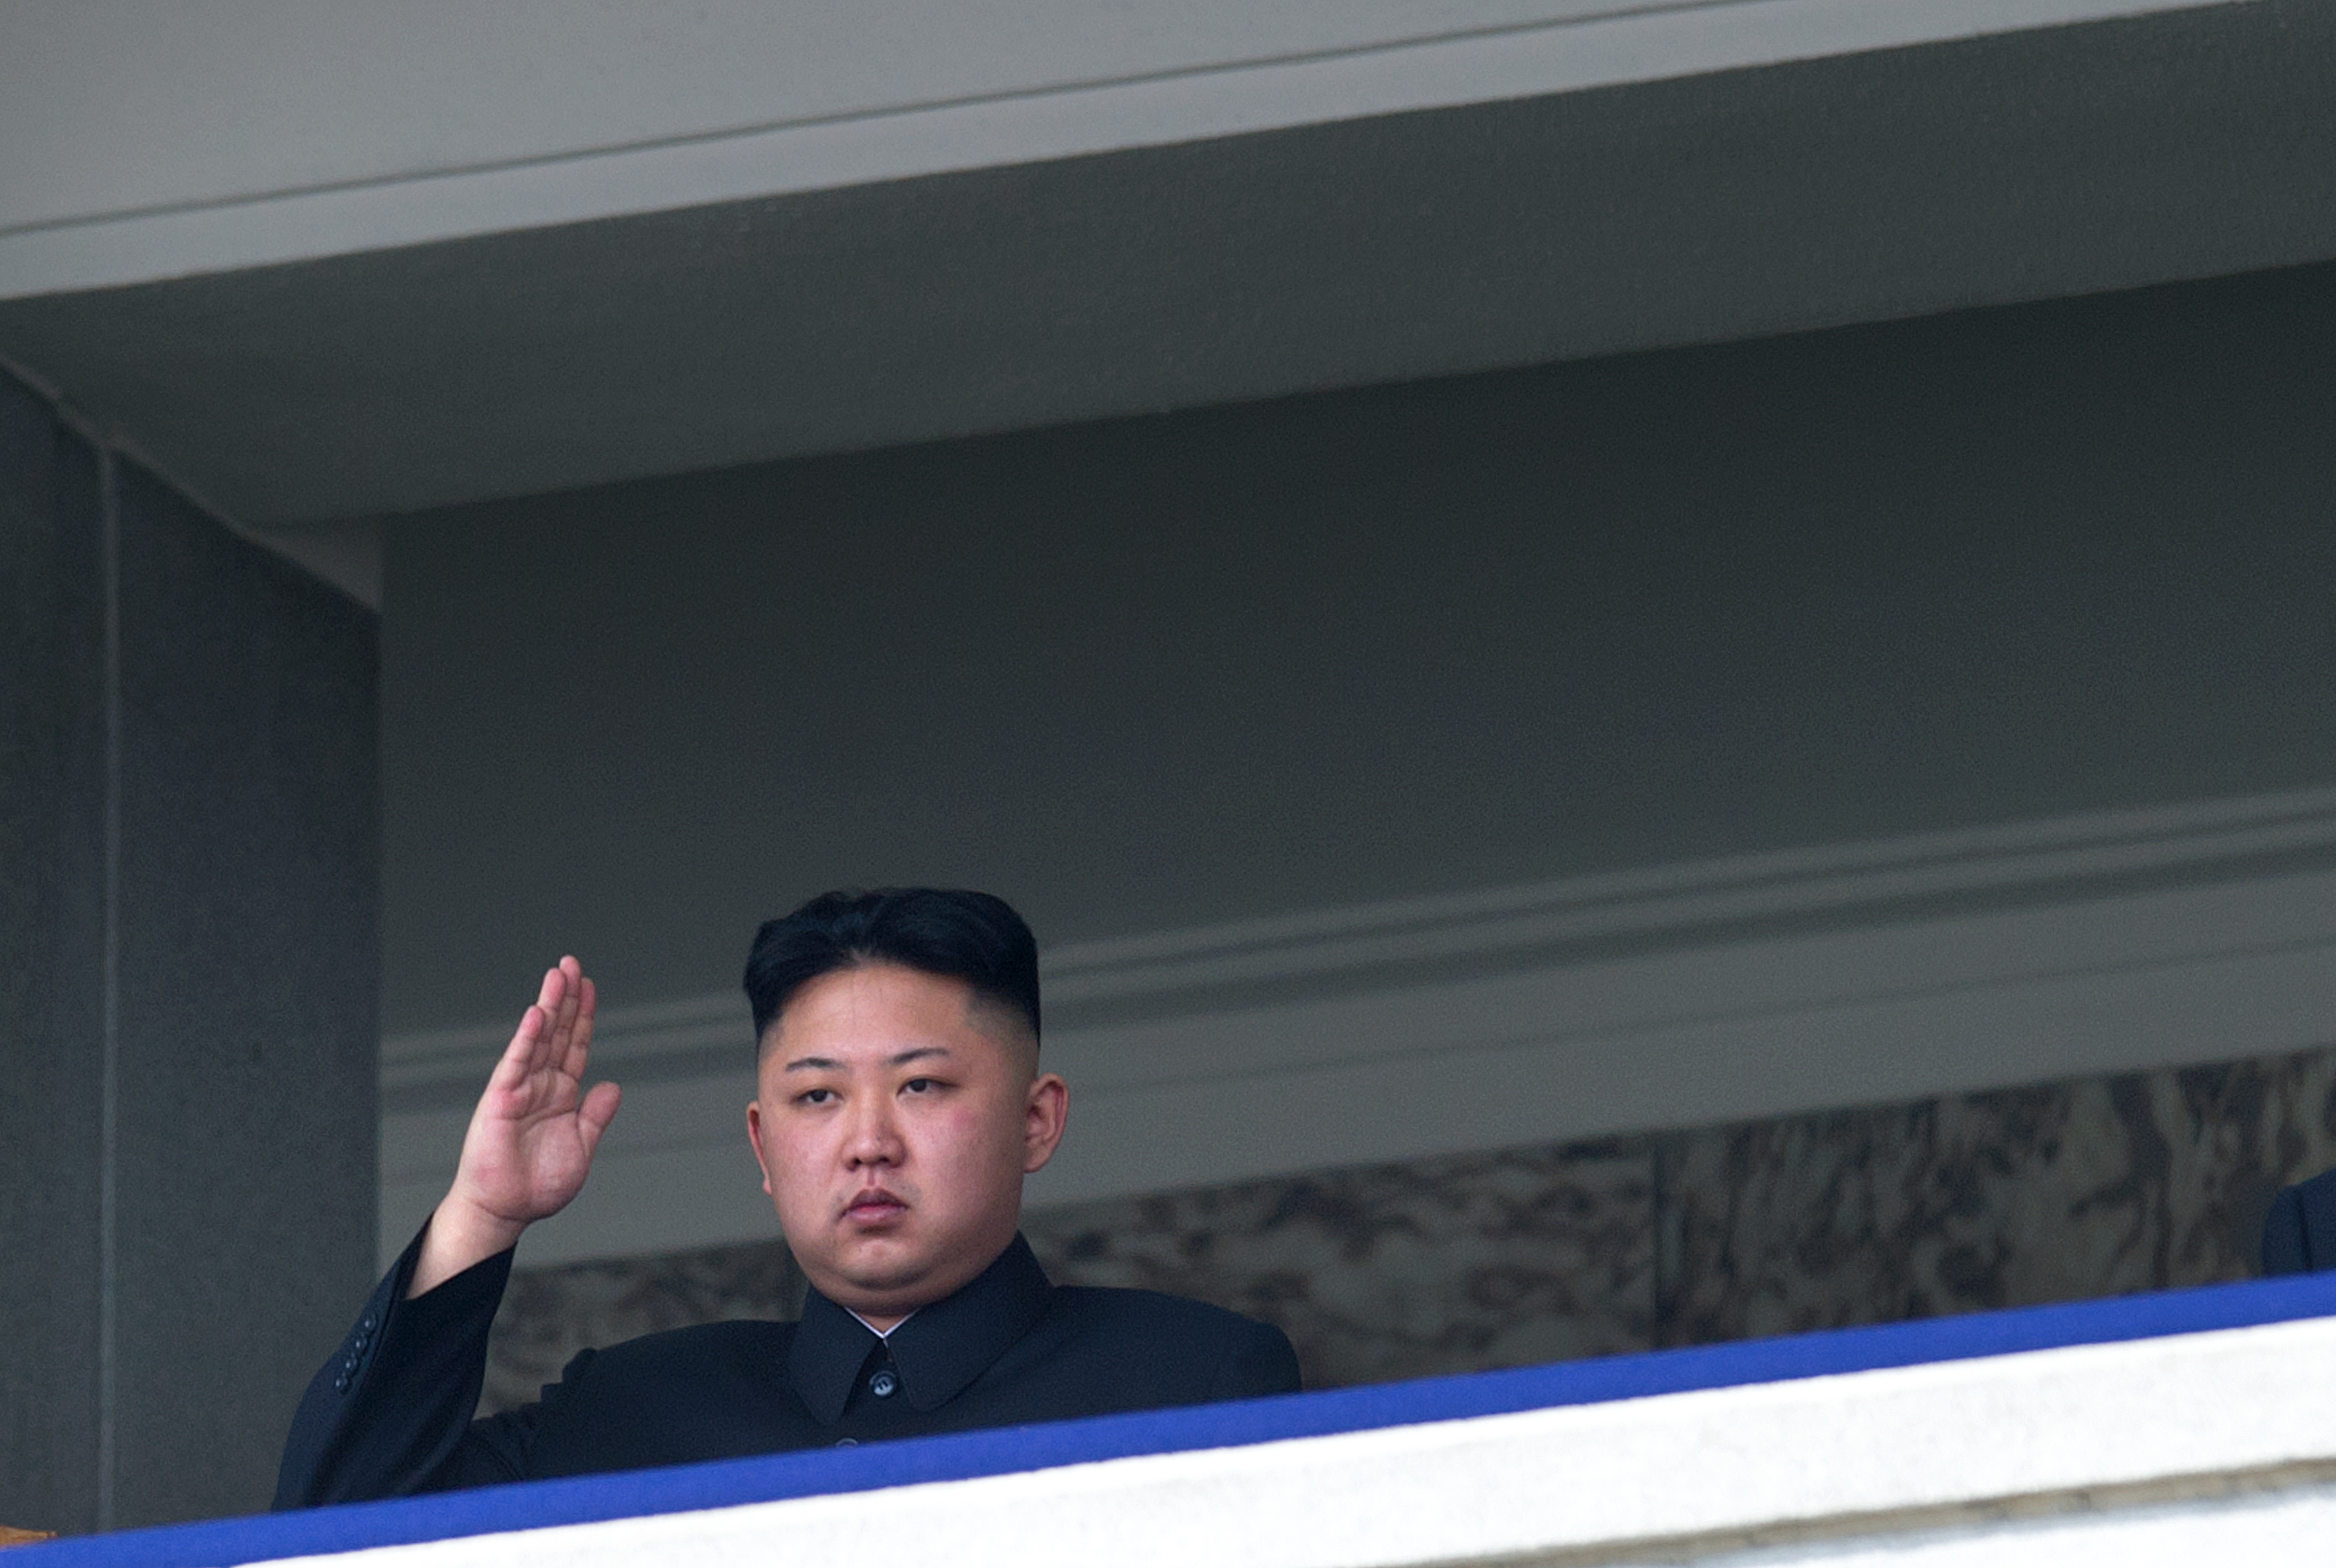 PHOTO: North Korean leader Kim Jong-Un salutes as he watches a military parade to mark 100 years since the birth of the country's founder and his grandfather, Kim Il-Sung, in Pyongyang on April 15, 2012.  